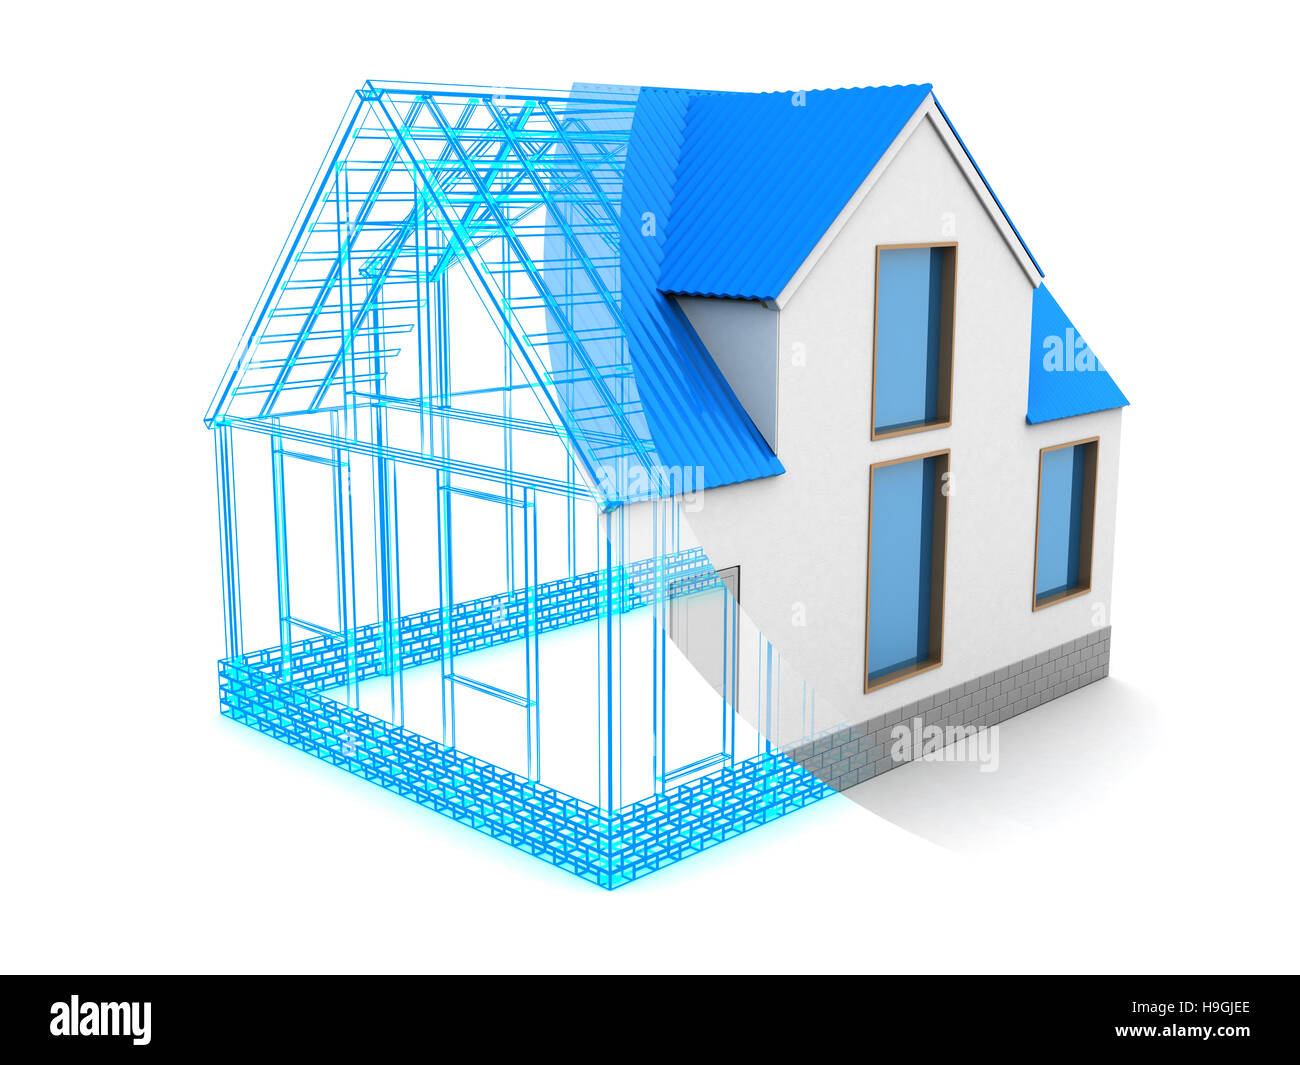 abstract 3d illustration of house design process Stock Photo